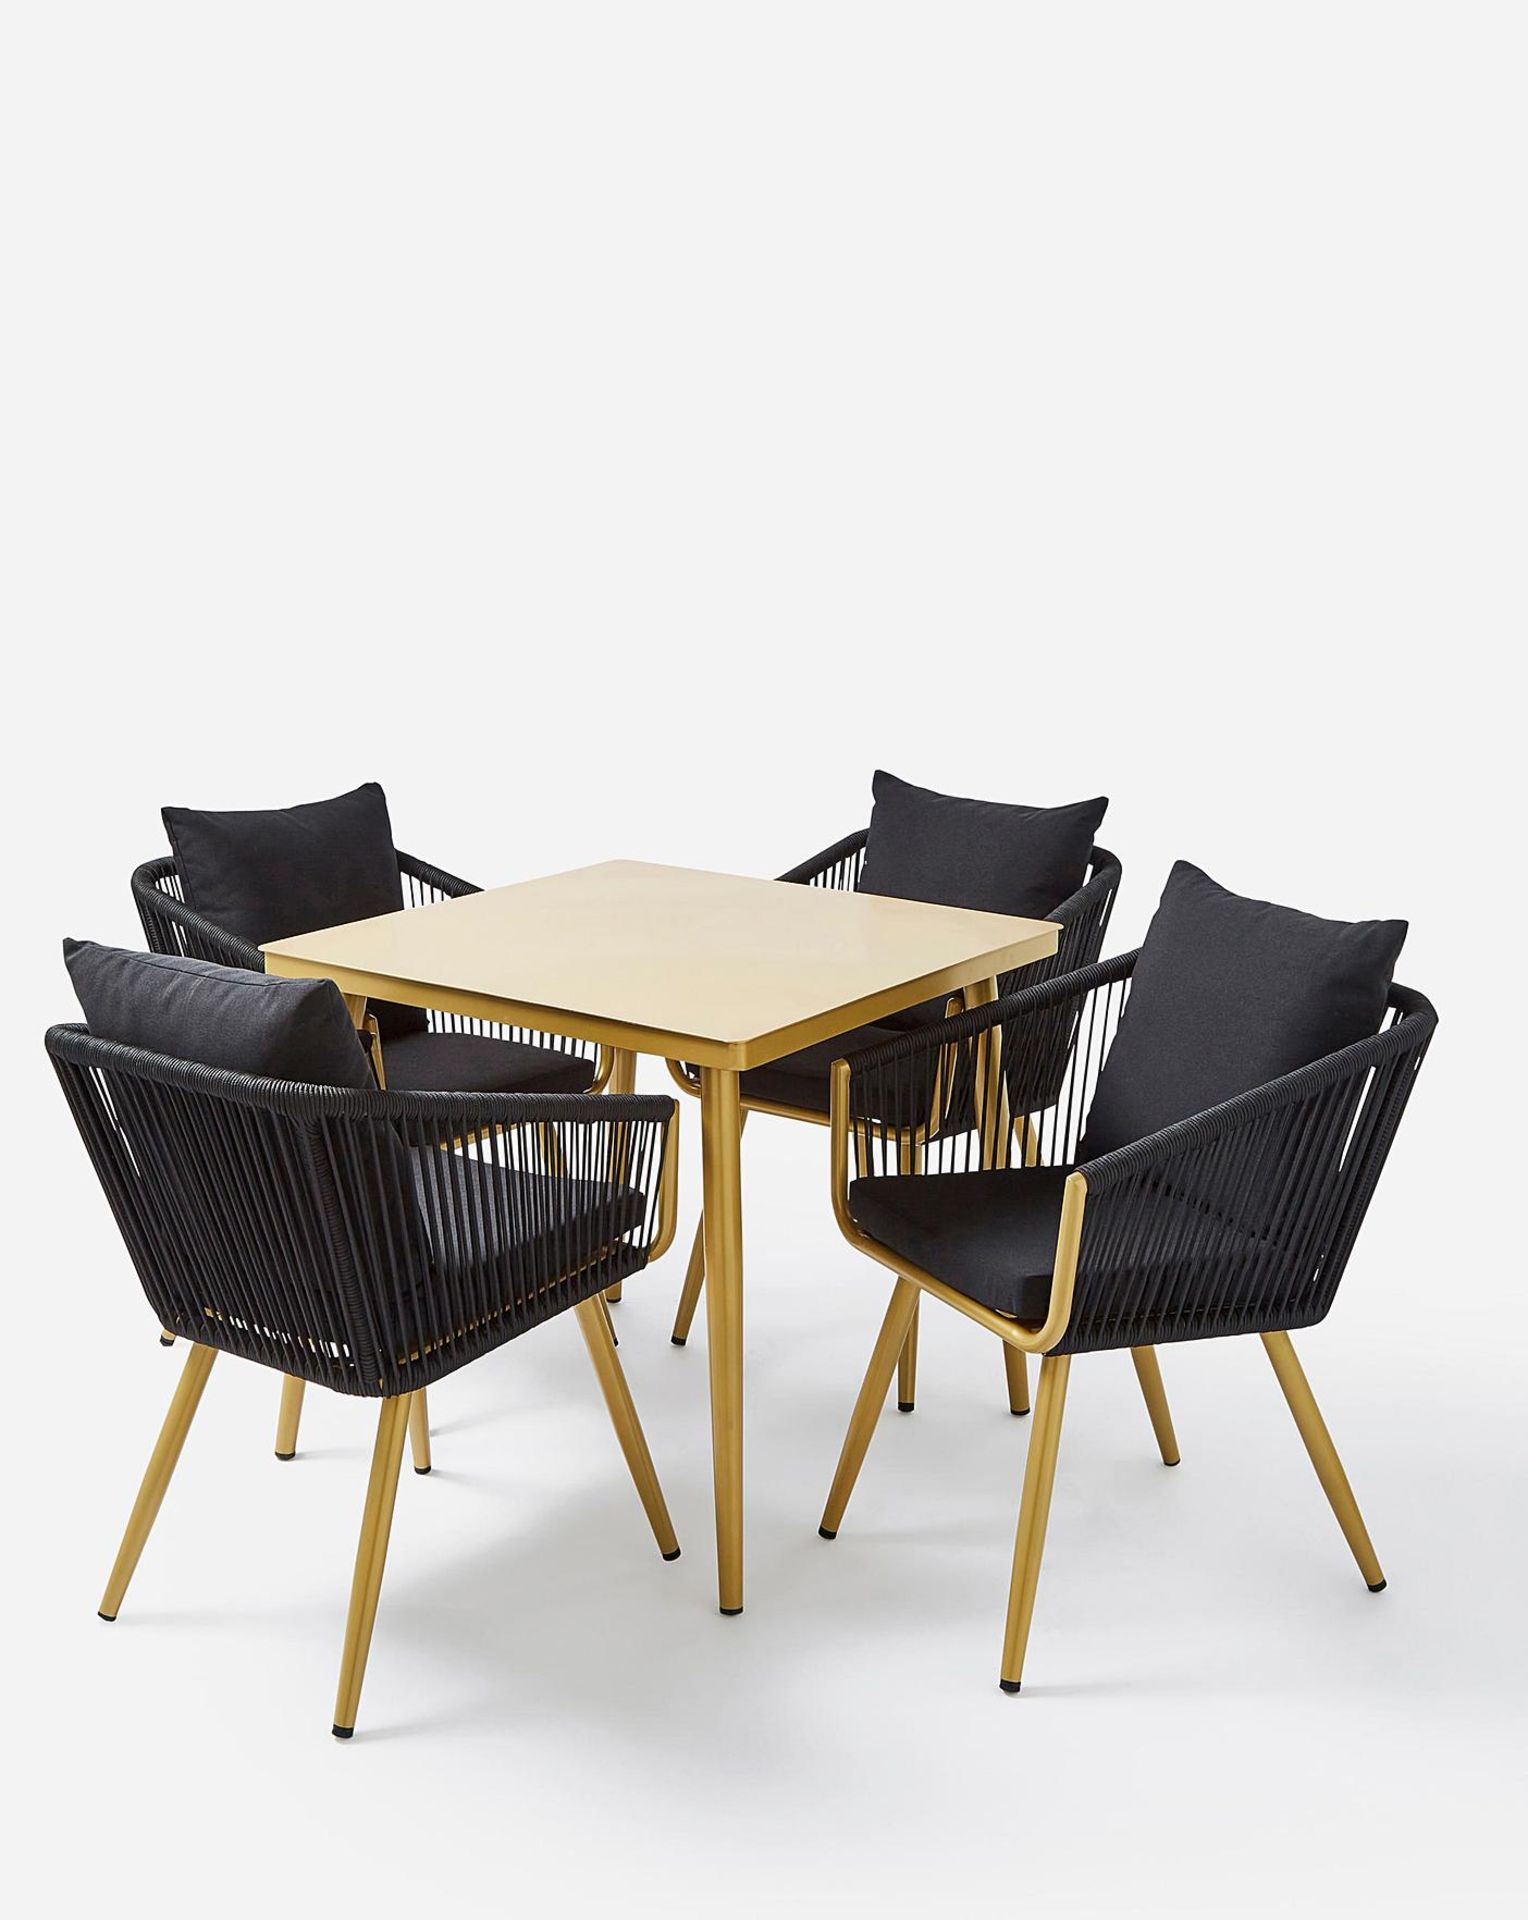 Trade Lot 4 x New & Packaged Joanna Hope Naya 4 Seater Dining Sets. RRP £719 each. This Exclusive - Image 3 of 4